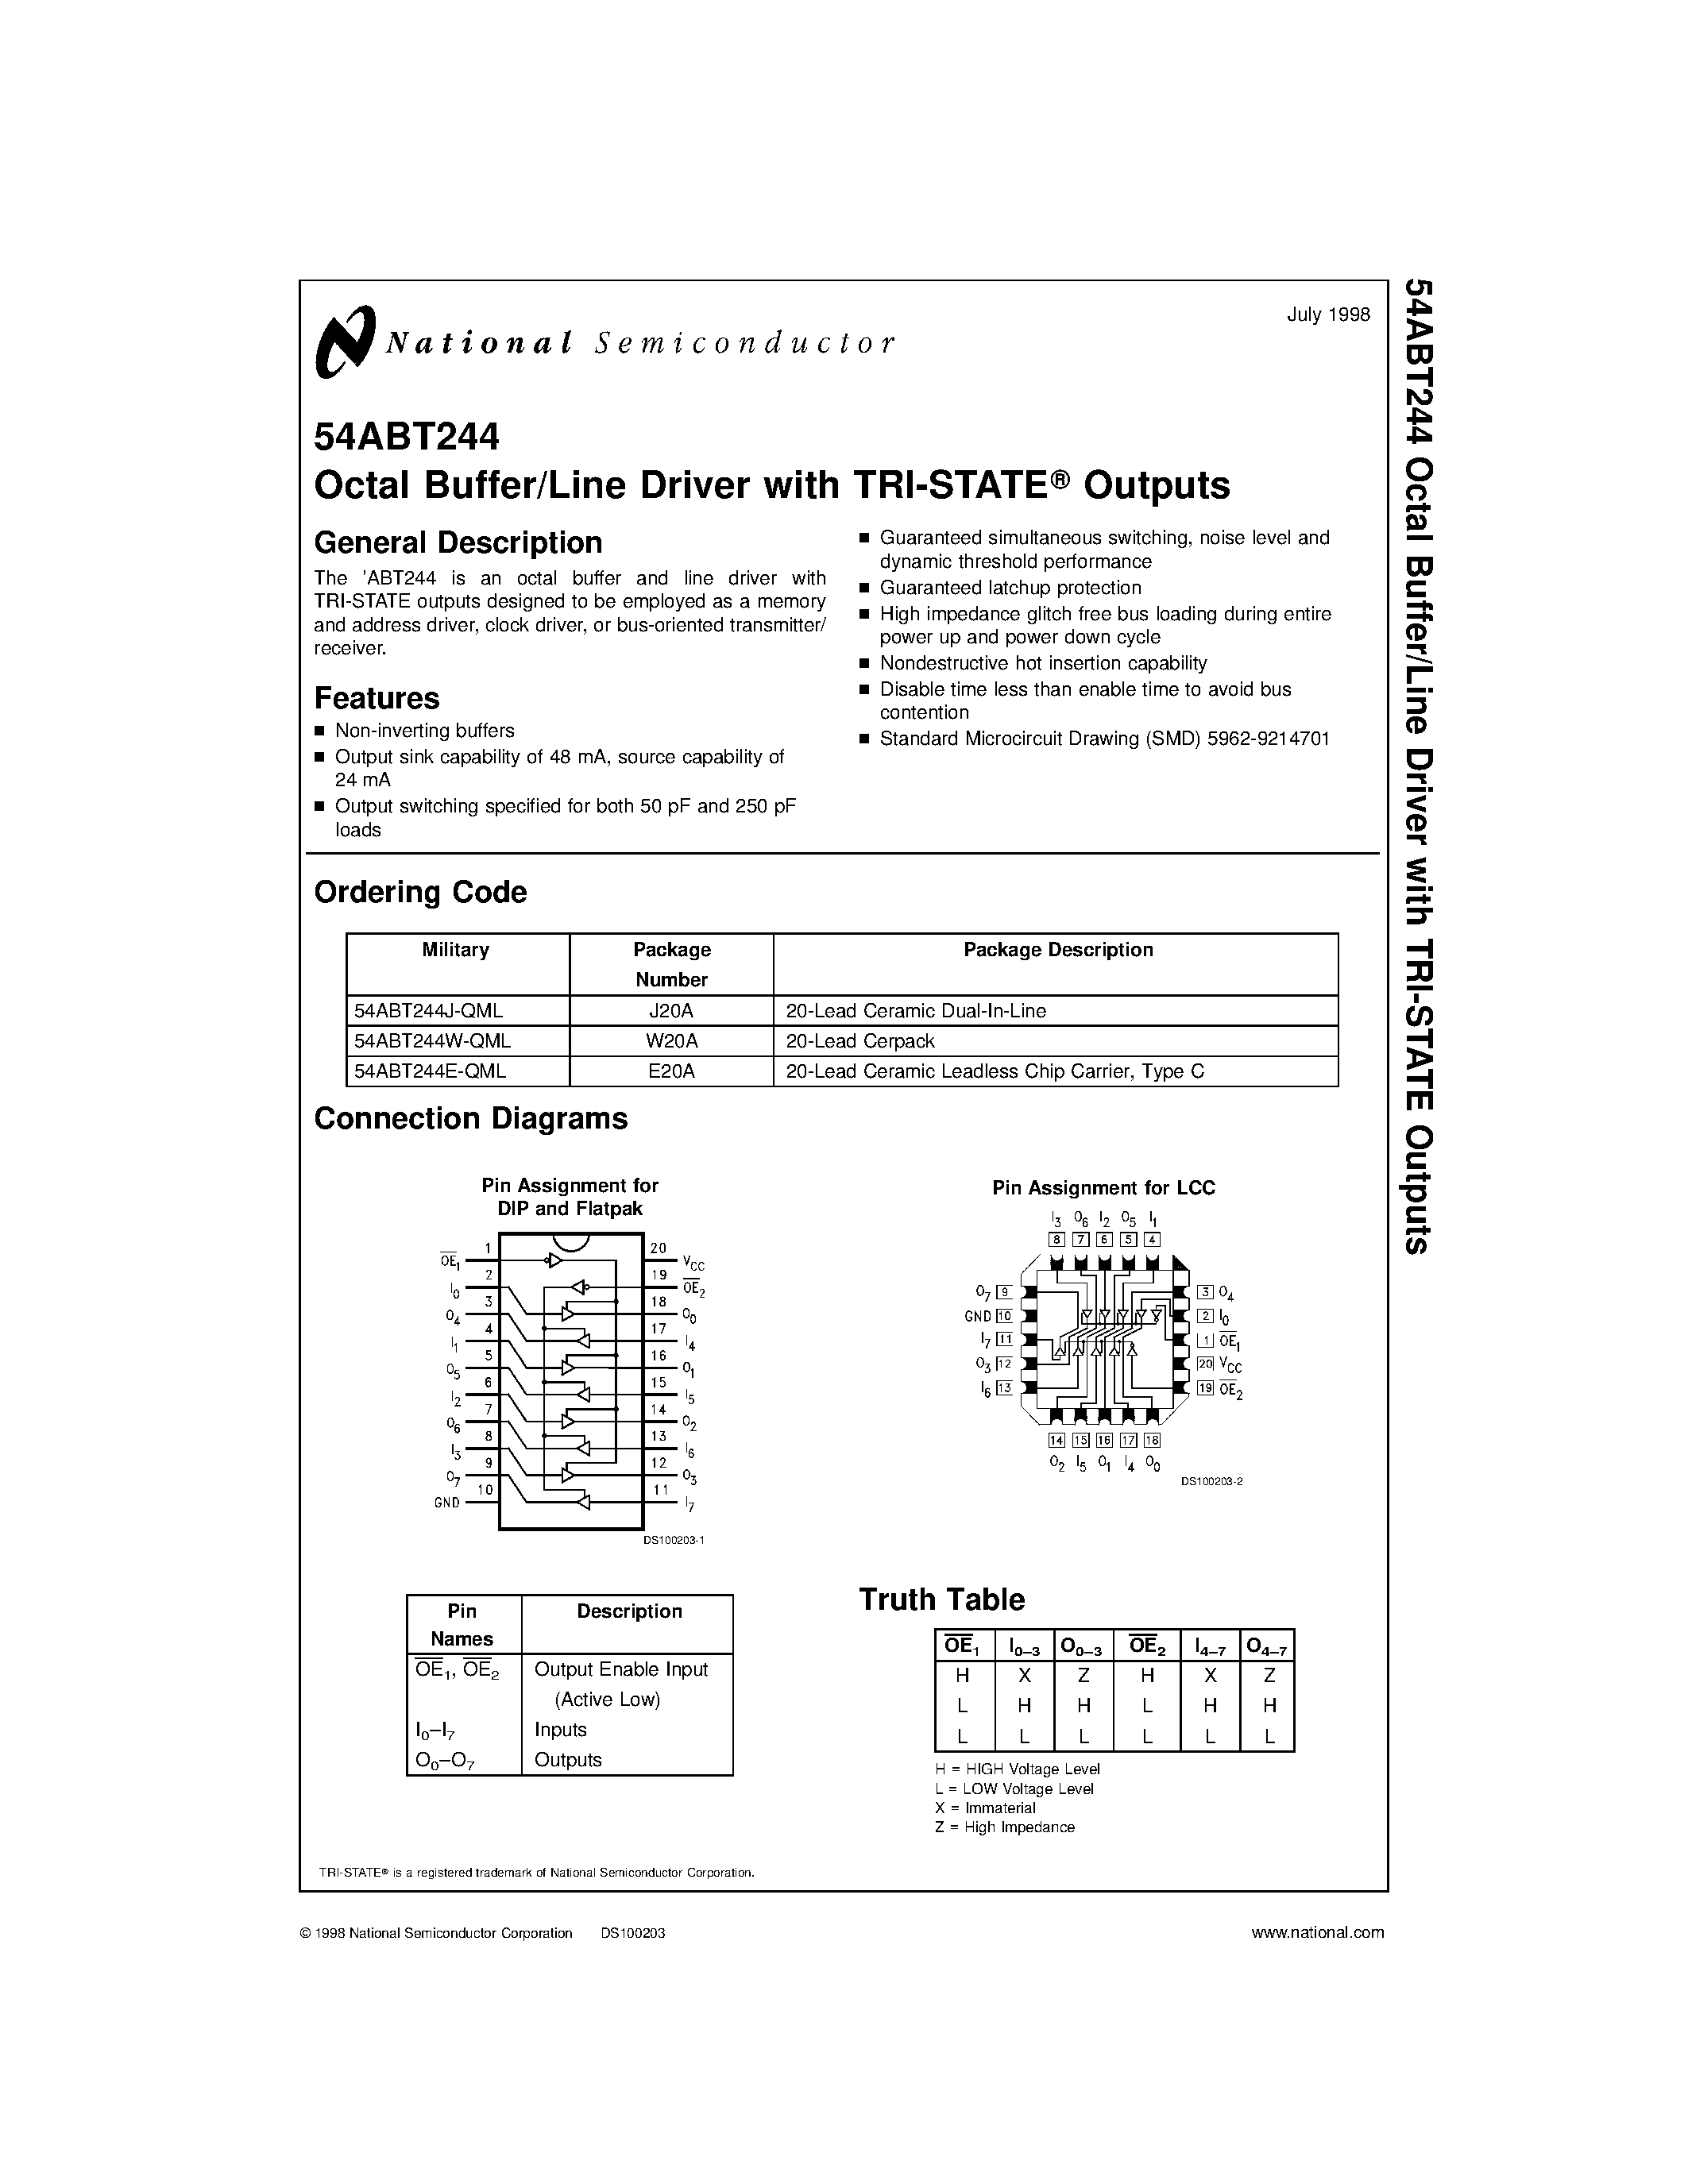 Datasheet 54ABT244 - Octal Buffer/Line Driver with TRI-STATE Outputs page 1